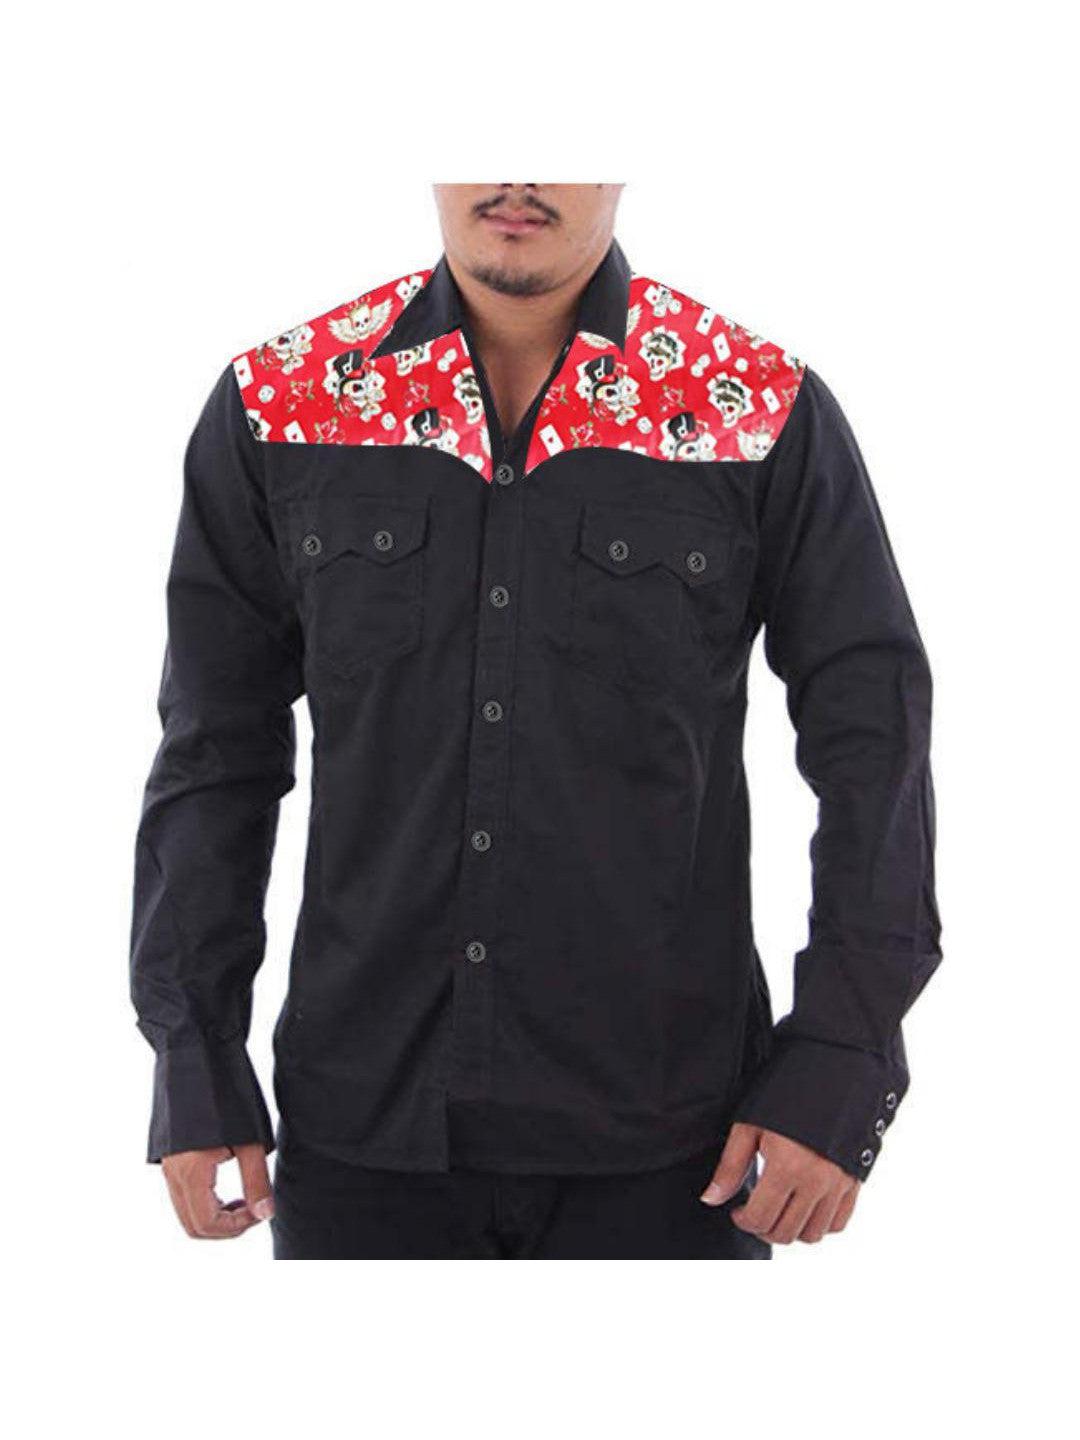 Men's Vintage Western Shirt Playing for Keeps